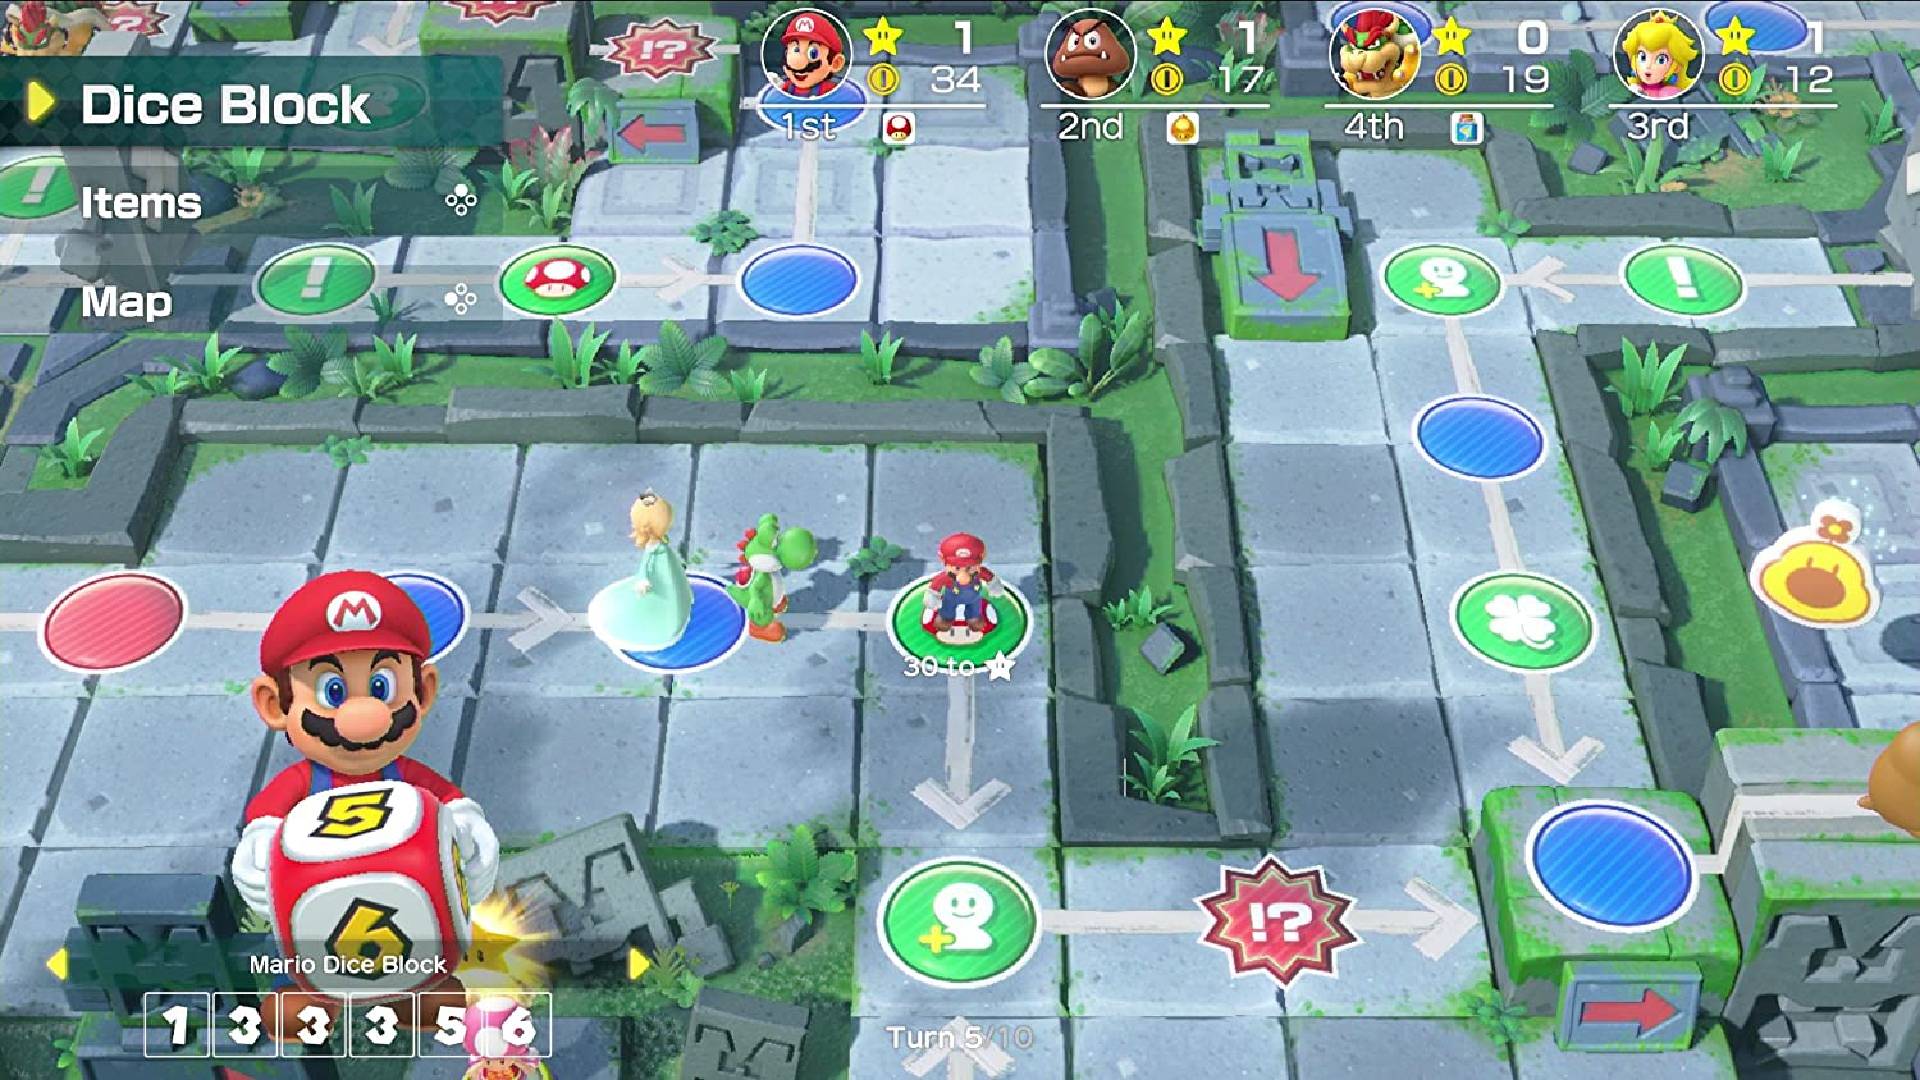 Mario is holding a dice, ready to roll and move forward over a Mario Party board